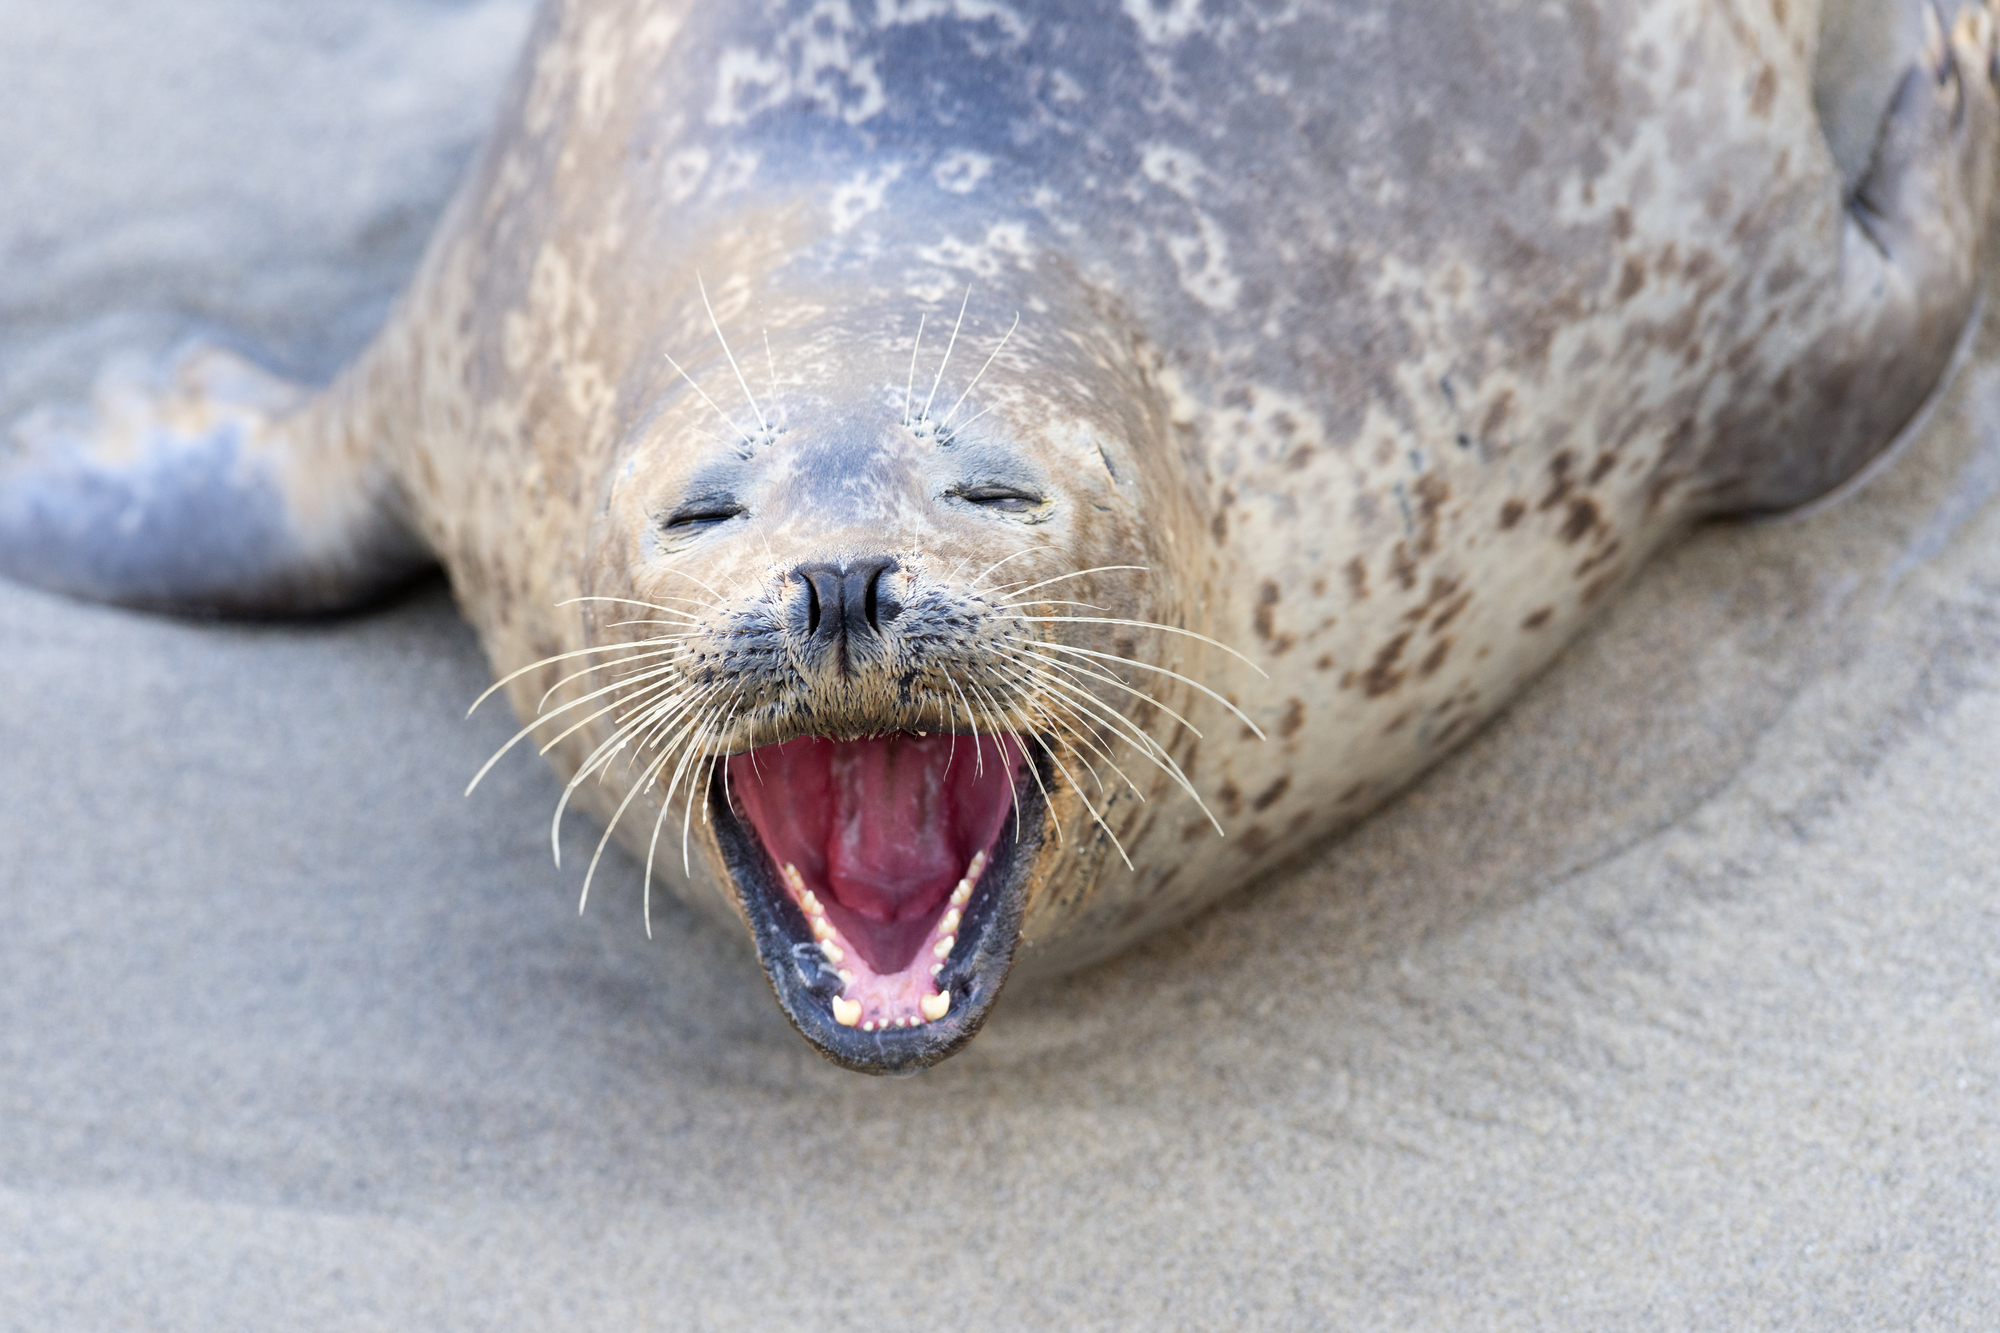 Seal with mouth open exposing sharp teeth